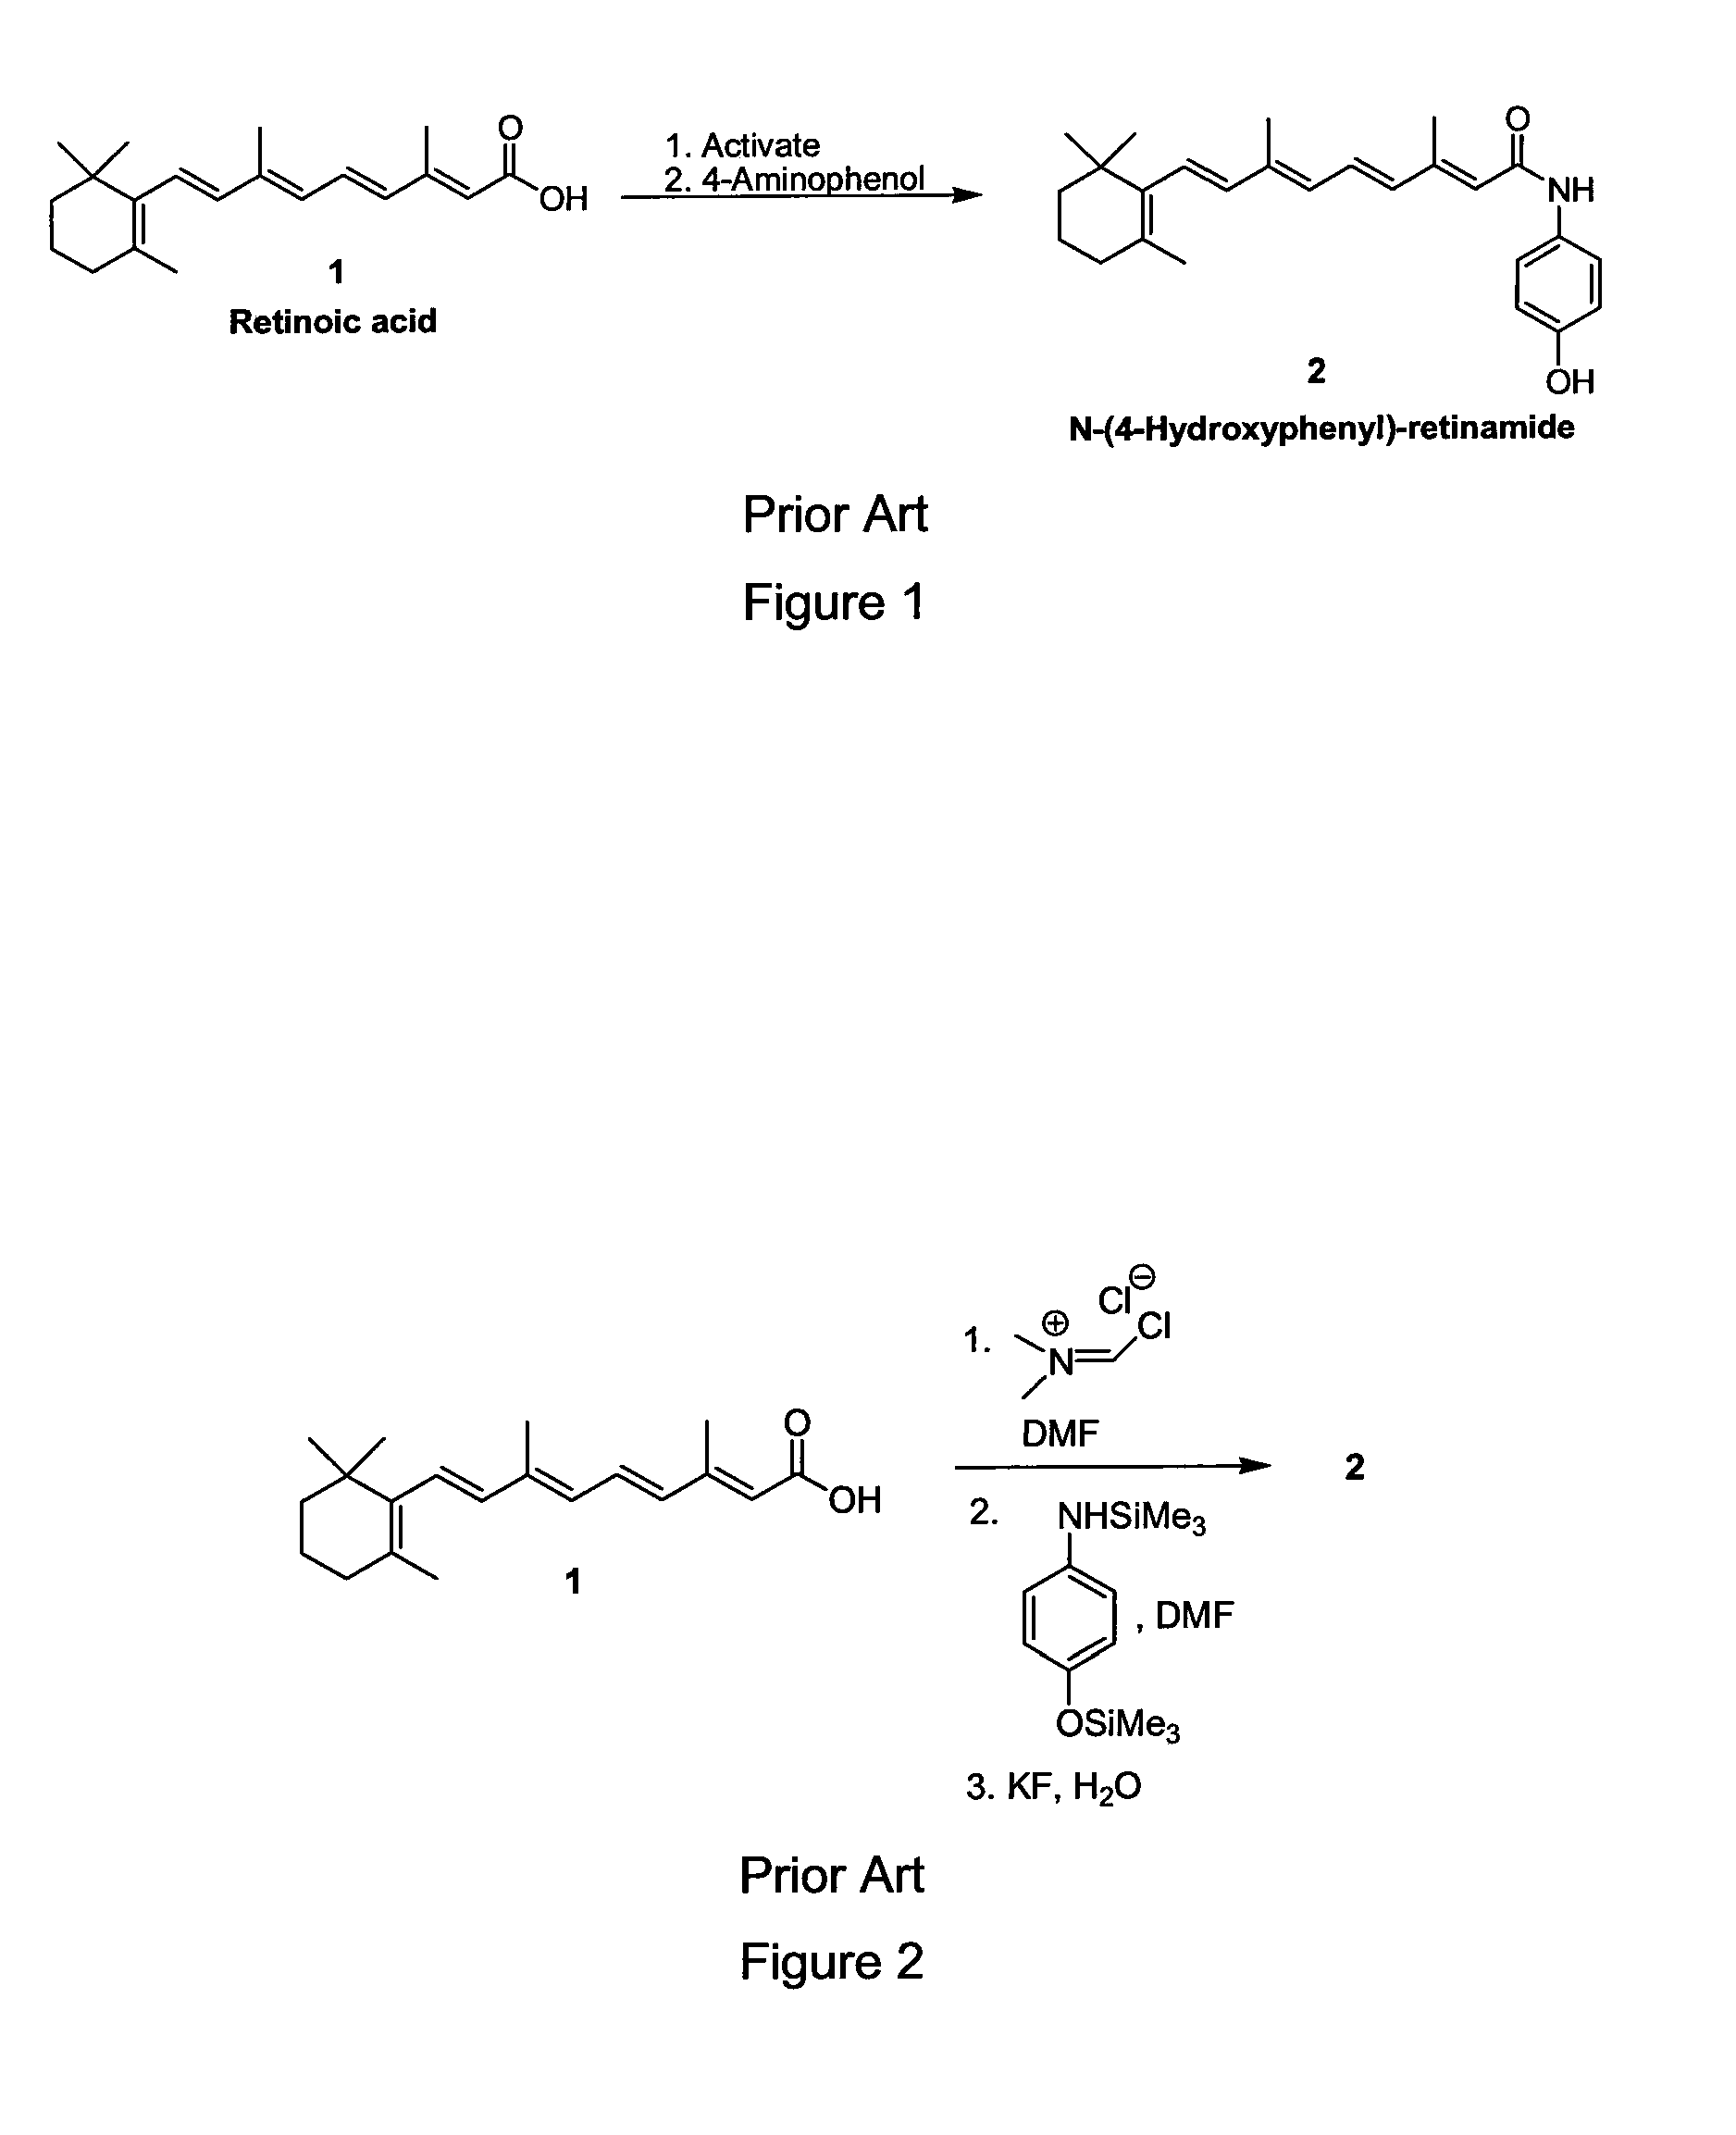 Preparation of Amides of Retinoic Acid Via Mixed Anhydride and Mixed Carbonate Intermediates